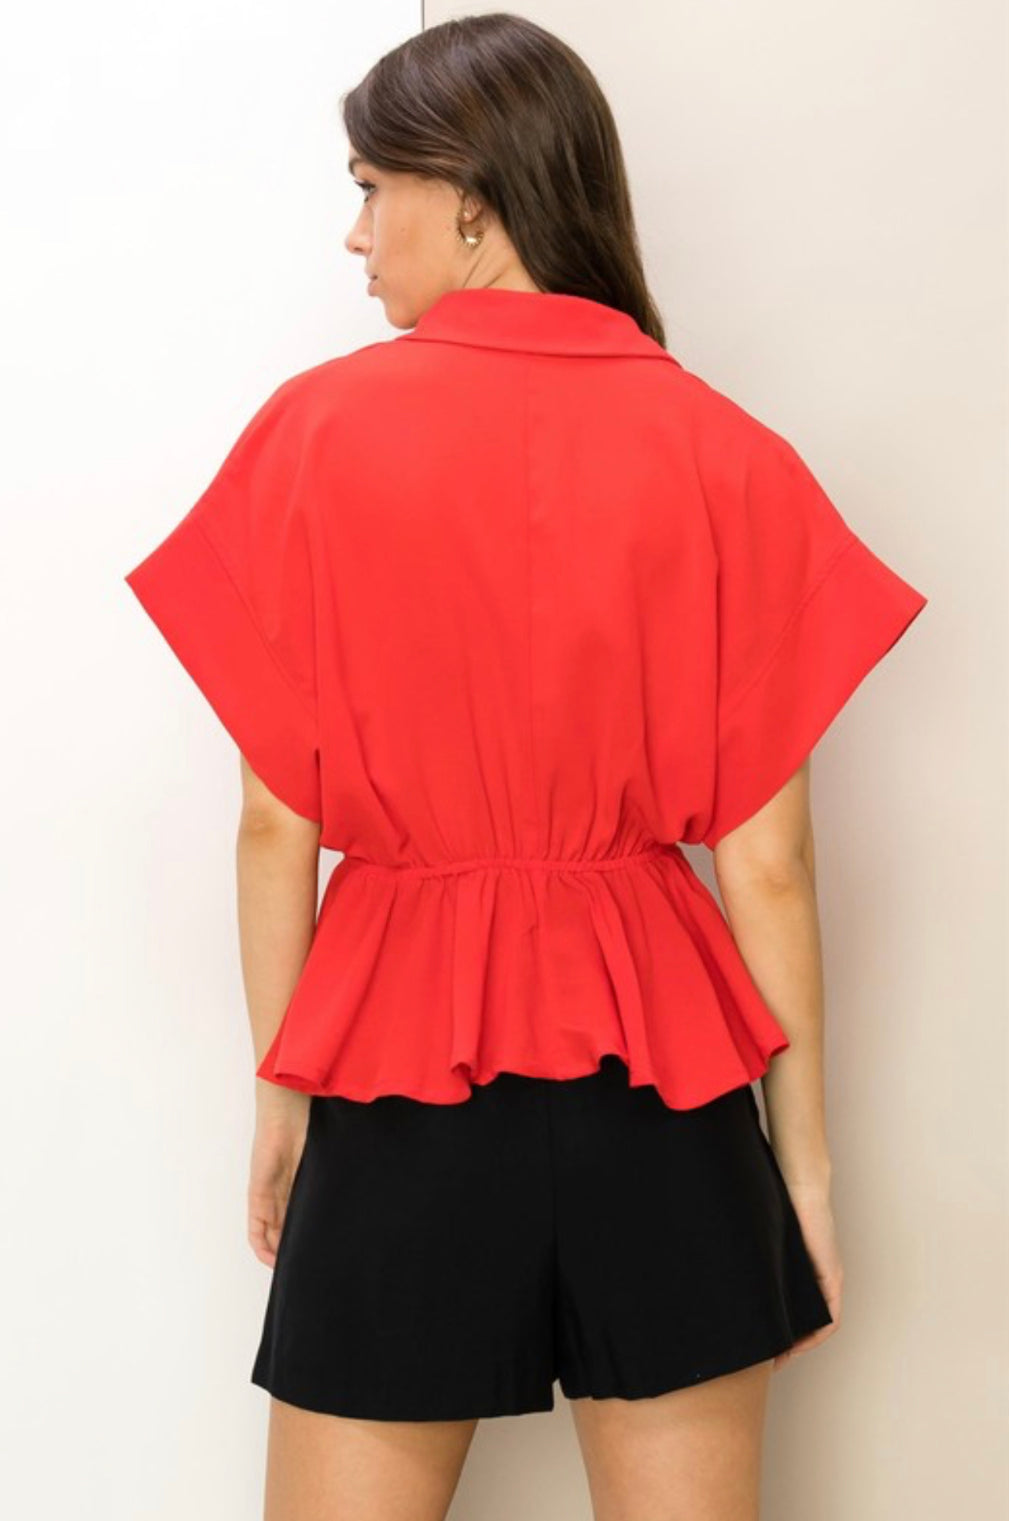 Back to Business Button Front Peplum Top